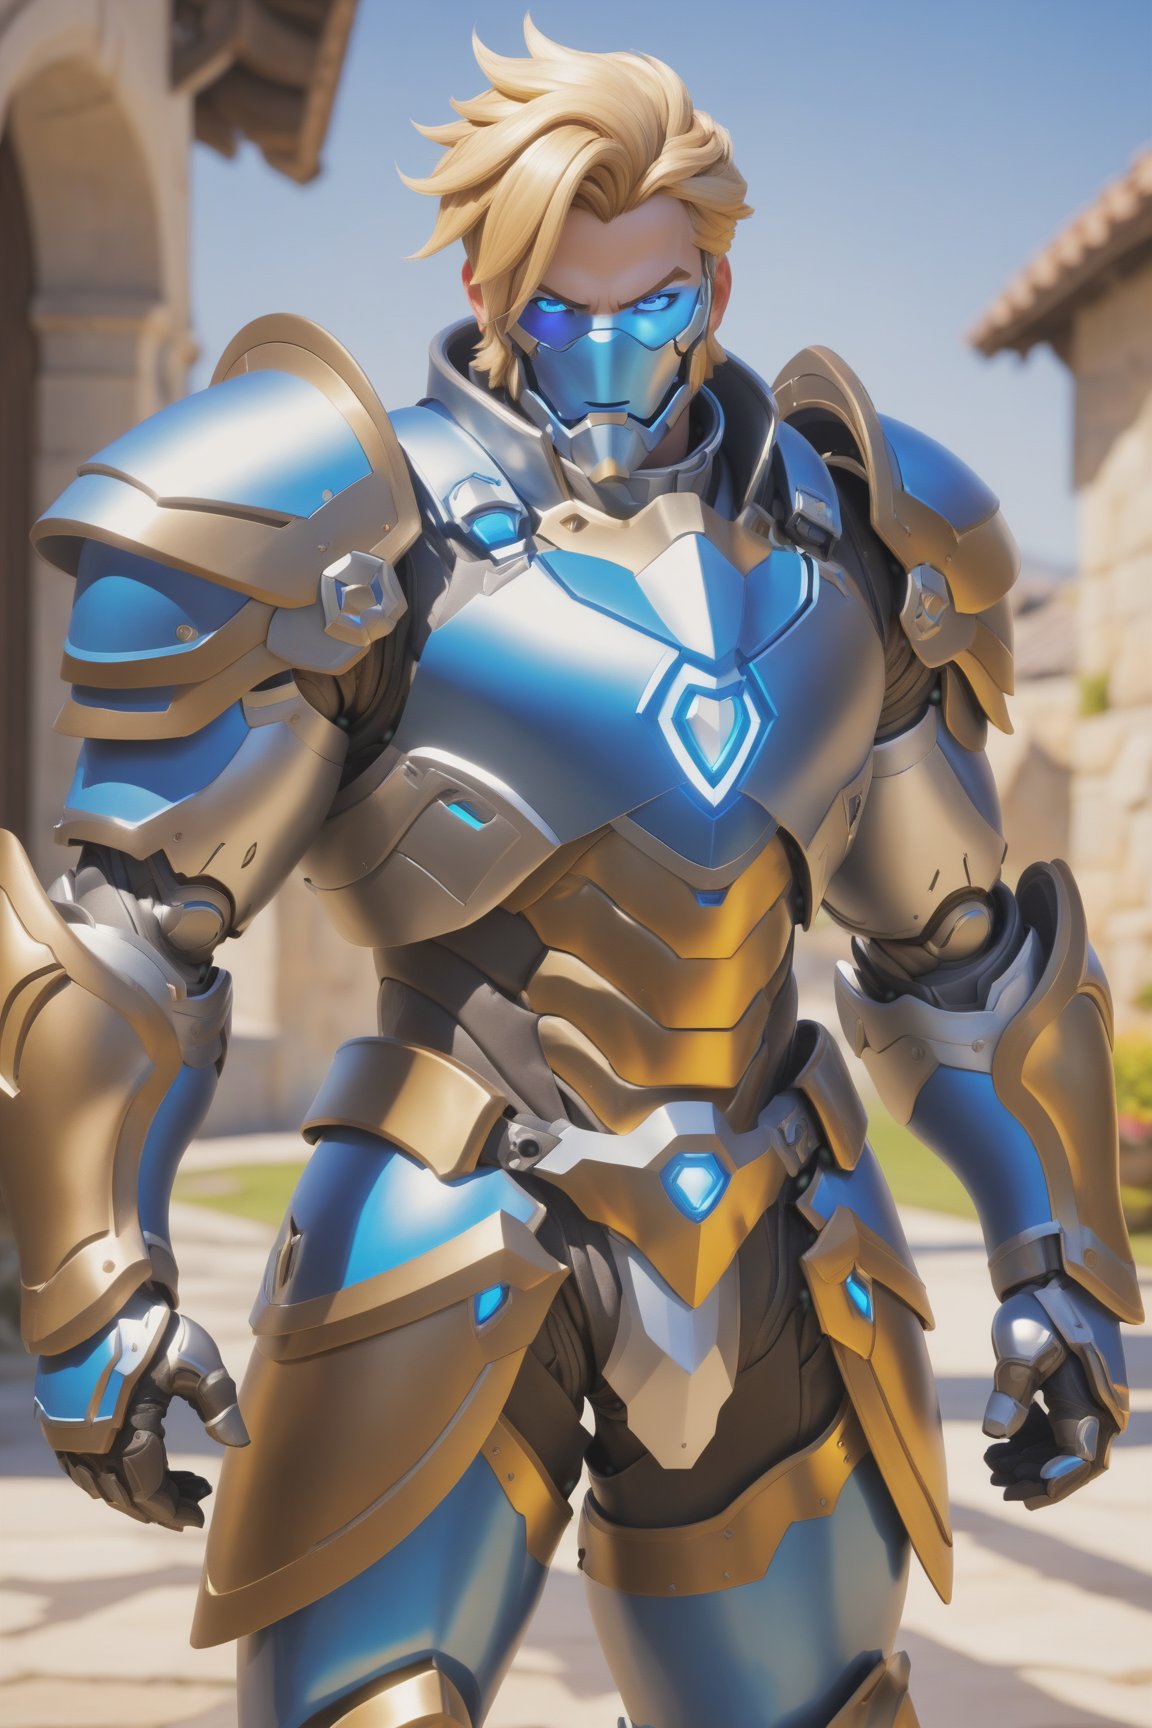 (best quality), (4K, HDR), ((Overwatch)), Paladin Reinhart, musuclar man, shiny armor, strong body, blonde hair, blue eyes, might shield (various camera angles), fantasy style armor and clothing, fantasy, vibrant colors, 